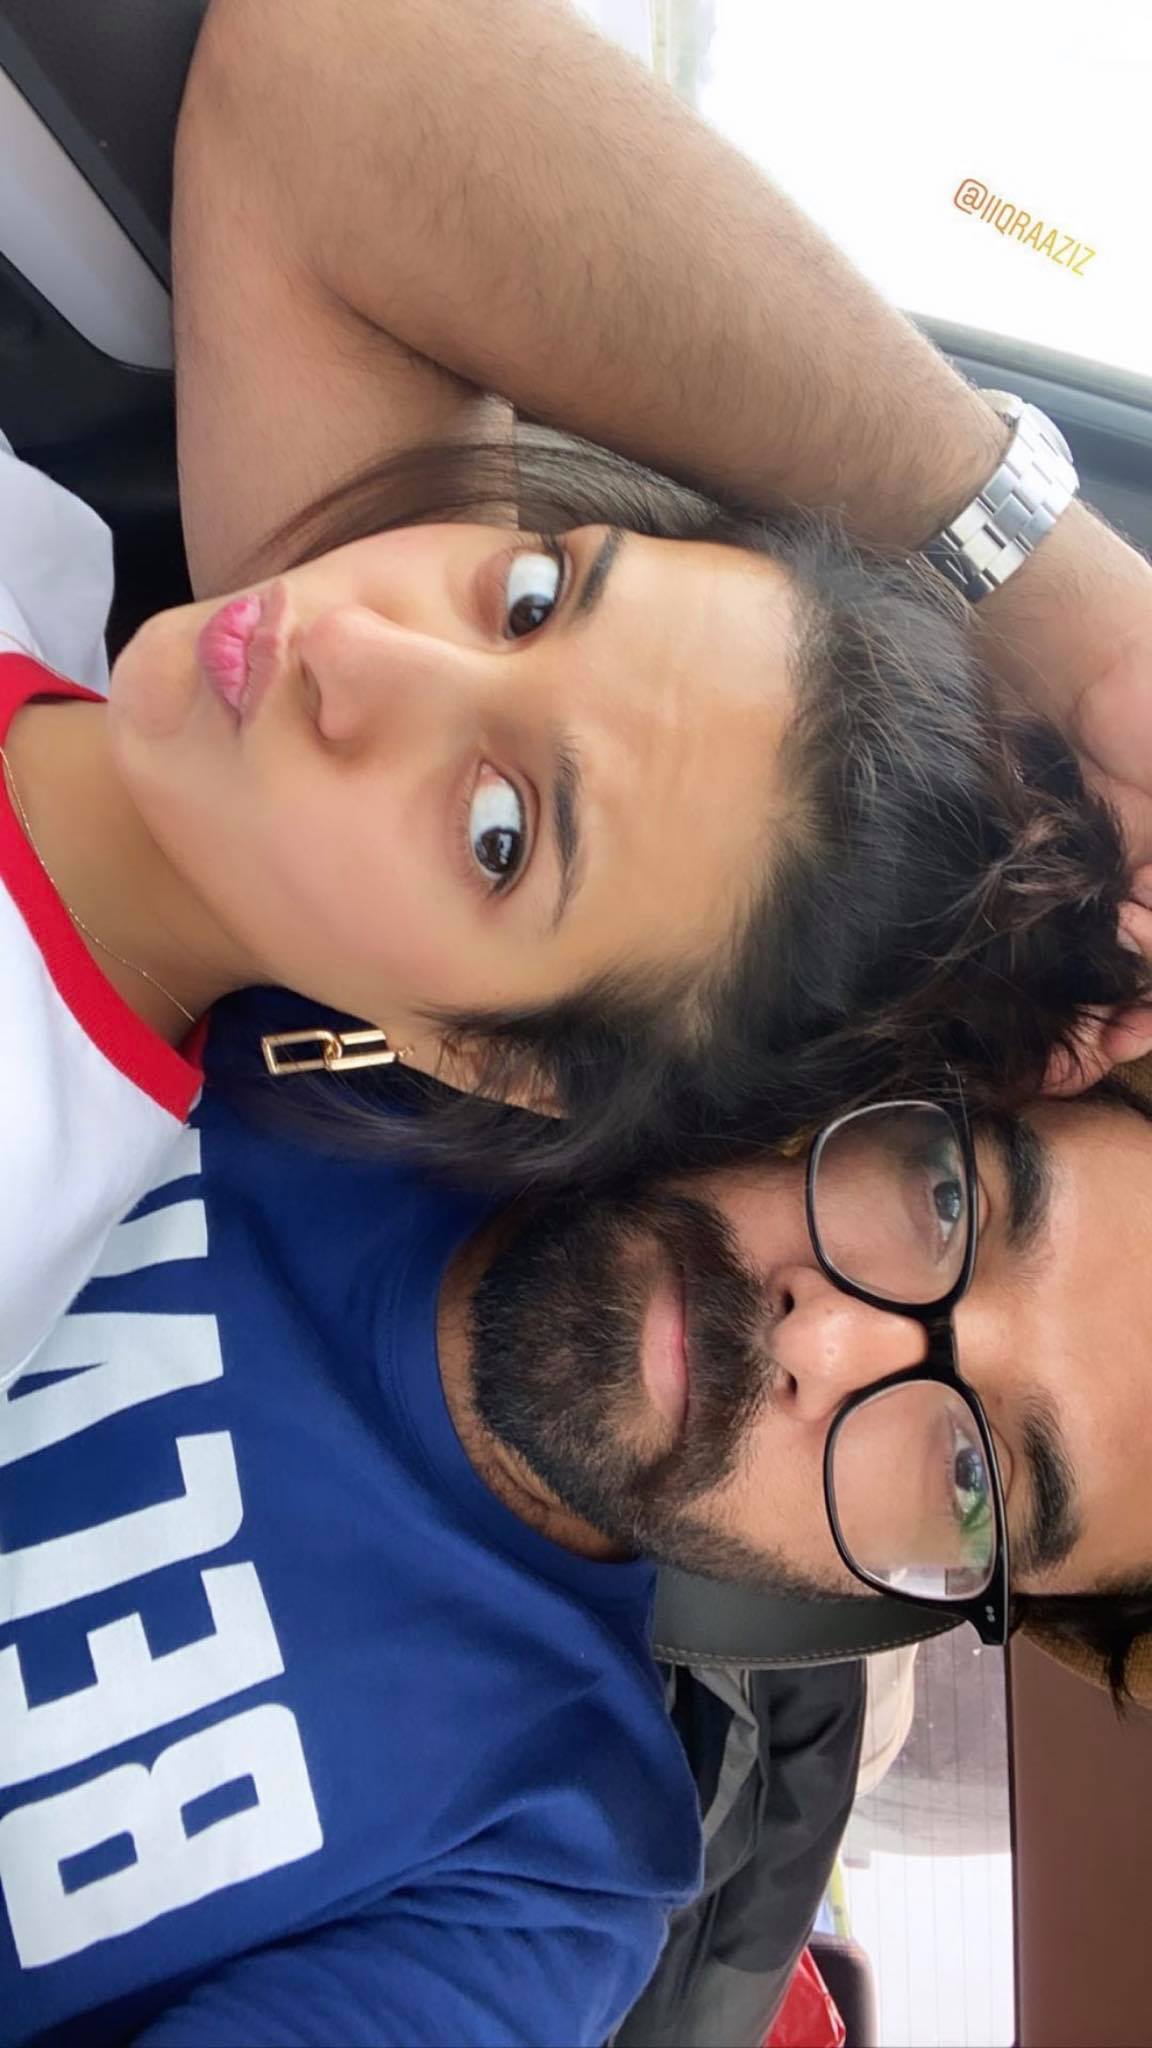 Iqra Says She Is 'Chipkuu' For Yasir Iqra Aziz and Yasir Hussain have a cute relationship. The one that makes you root for them and check up on what they are up to. We, as fans, are constantly shadowing them to know more about their life and get an update on what’s happening. This is why every little thing they do makes us all gooey for them. Recently, Iqra revealed how she gave Yasir a surprise and that’s too cute to handle for us all. Yasir Hussain Gets A Surprise In her recent post, Iqra revealed that she surprised Yasir because she just can’t leave him alone. She shared the picture on her Instagram account with the caption: “Yes i surprised him and just can’t stay away♥️ I am a chipkuu only for him” There was a super adorable picture to go with the caption. The couple also went on to share a few of their pictures on their Instagram stories too. See Iqra’s post here: What Was The Surprise All About? Though we do not know what exactly the surprise was about, since the couple did not share that publicly, but we have our guesses. From the looks of it, Yasir was in a busy workday and Iqra took some time out of her routine to surprise him by creating a plan out of the blue. Fans Reaction To The Surprise We all know how everyone is hooked up on Instagram these days, especially shadowing celebrities. The moment Iqra had to upload this post and people started flooding the comments asking the deets. Some people wanted to know what the surprise was, while others wanted to know about Yasir’s reaction. But, since the couple wanted to keep that private, we could not know the specific details of this surprise. Well, we wish both of this similar happiness and surprises together. They are indeed one of the loveliest Pakistani celebrity couples and we feel delighted every time we see them on our feeds and TV screens.